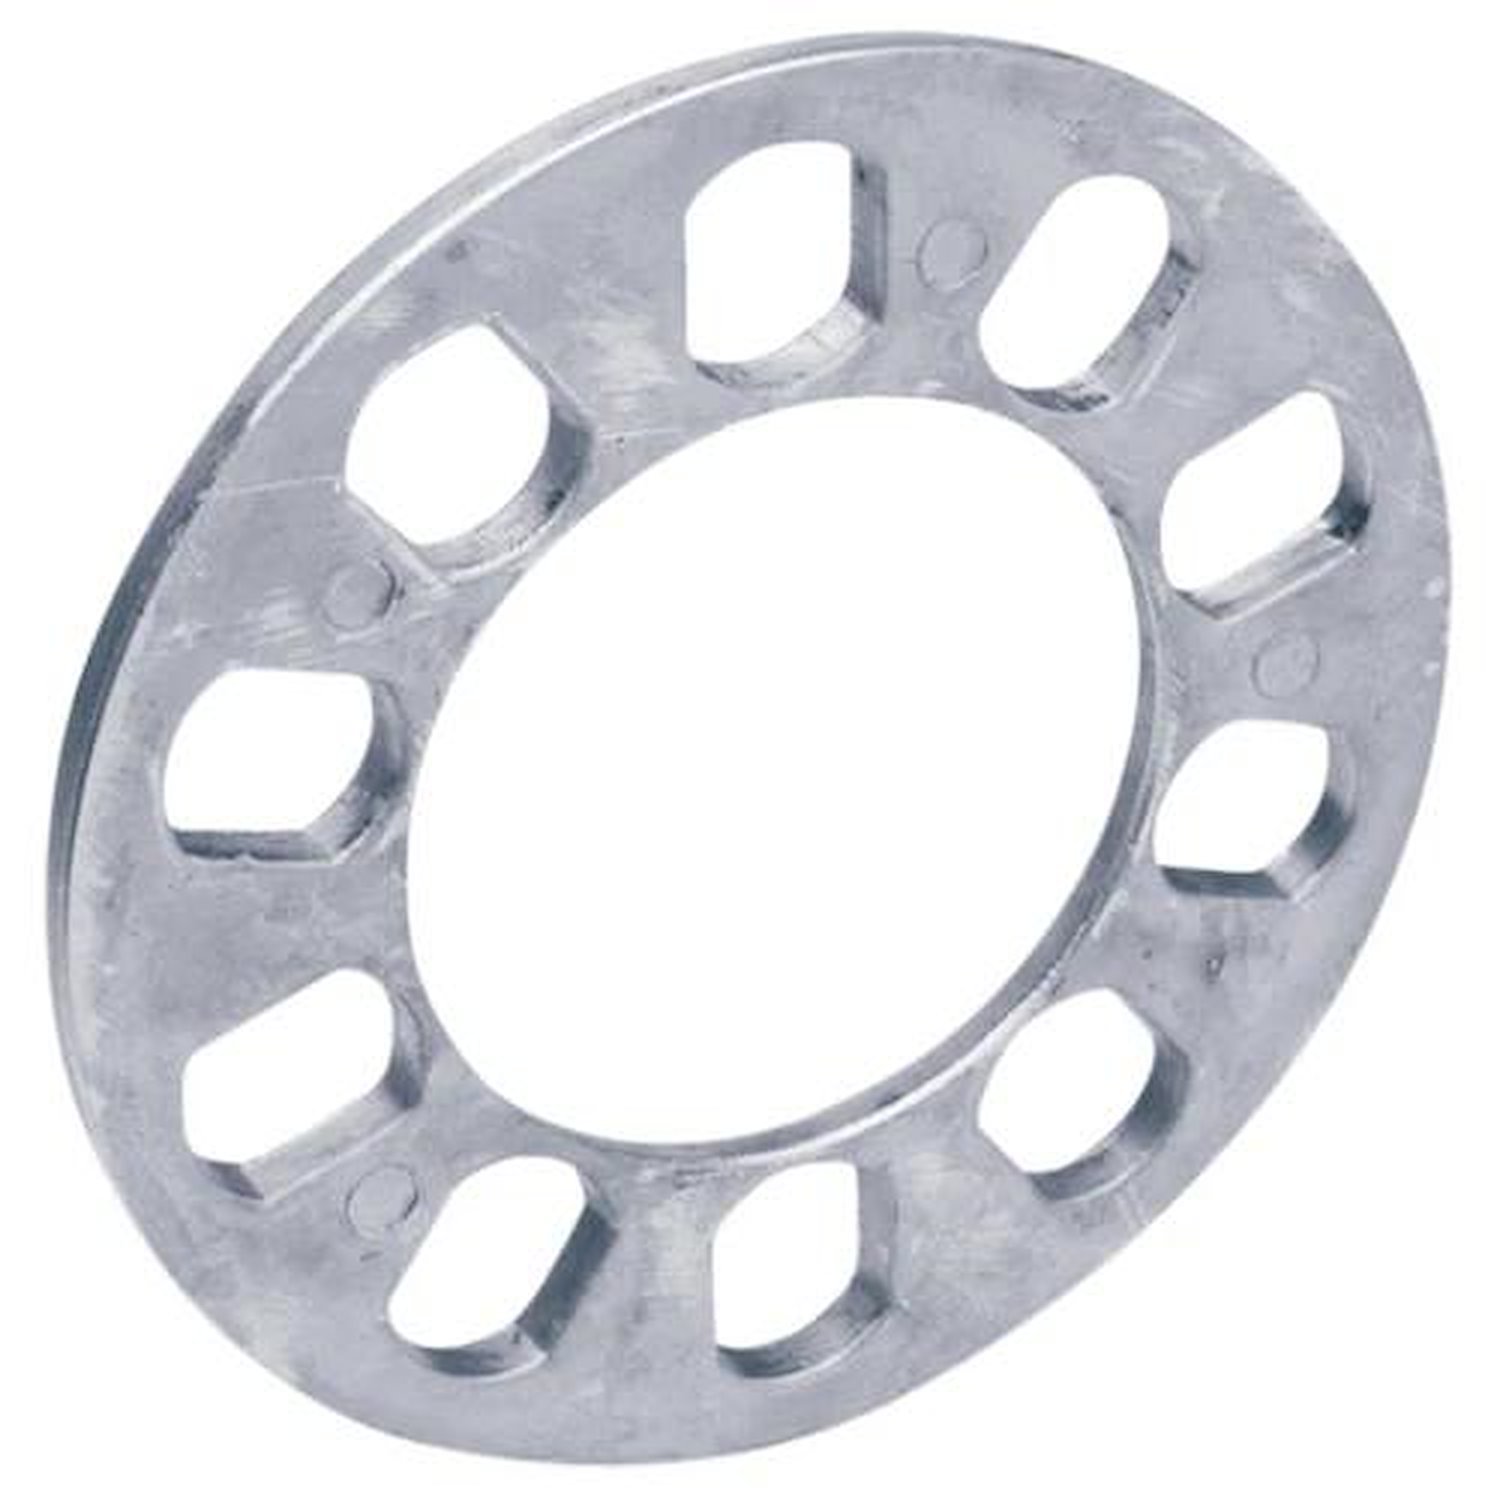 SP601C Wheel Spacer, 4 x 100 / 4 x 120, 1/4" Thick